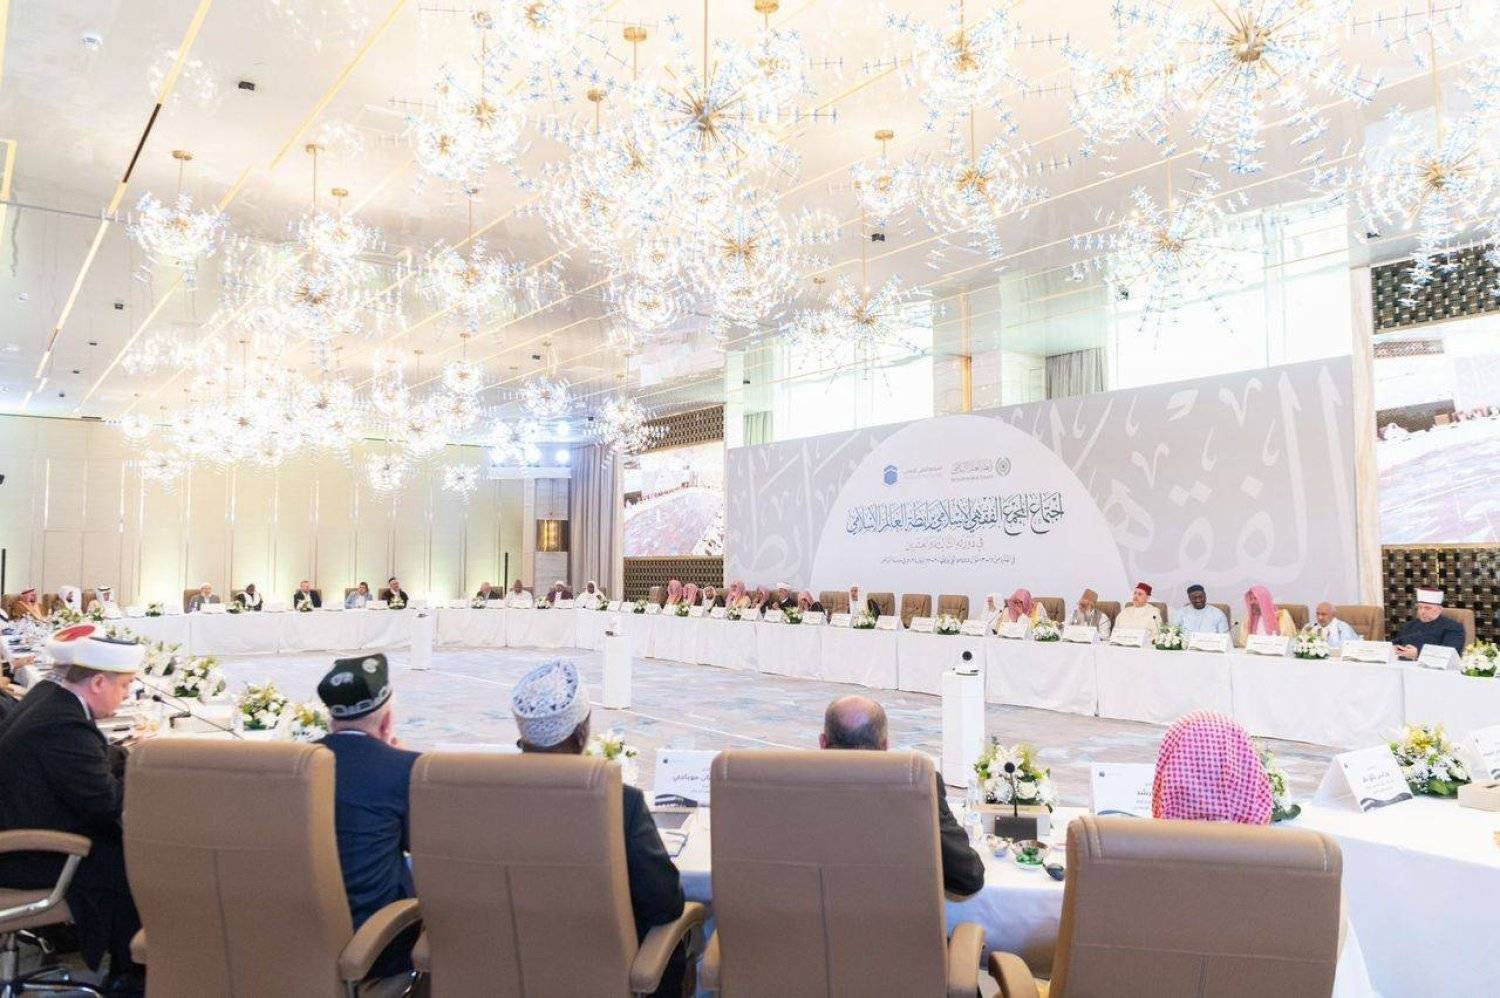 Senior clerics and scholars are seen at the Islamic Fiqh Council in Riyadh. (MWL)